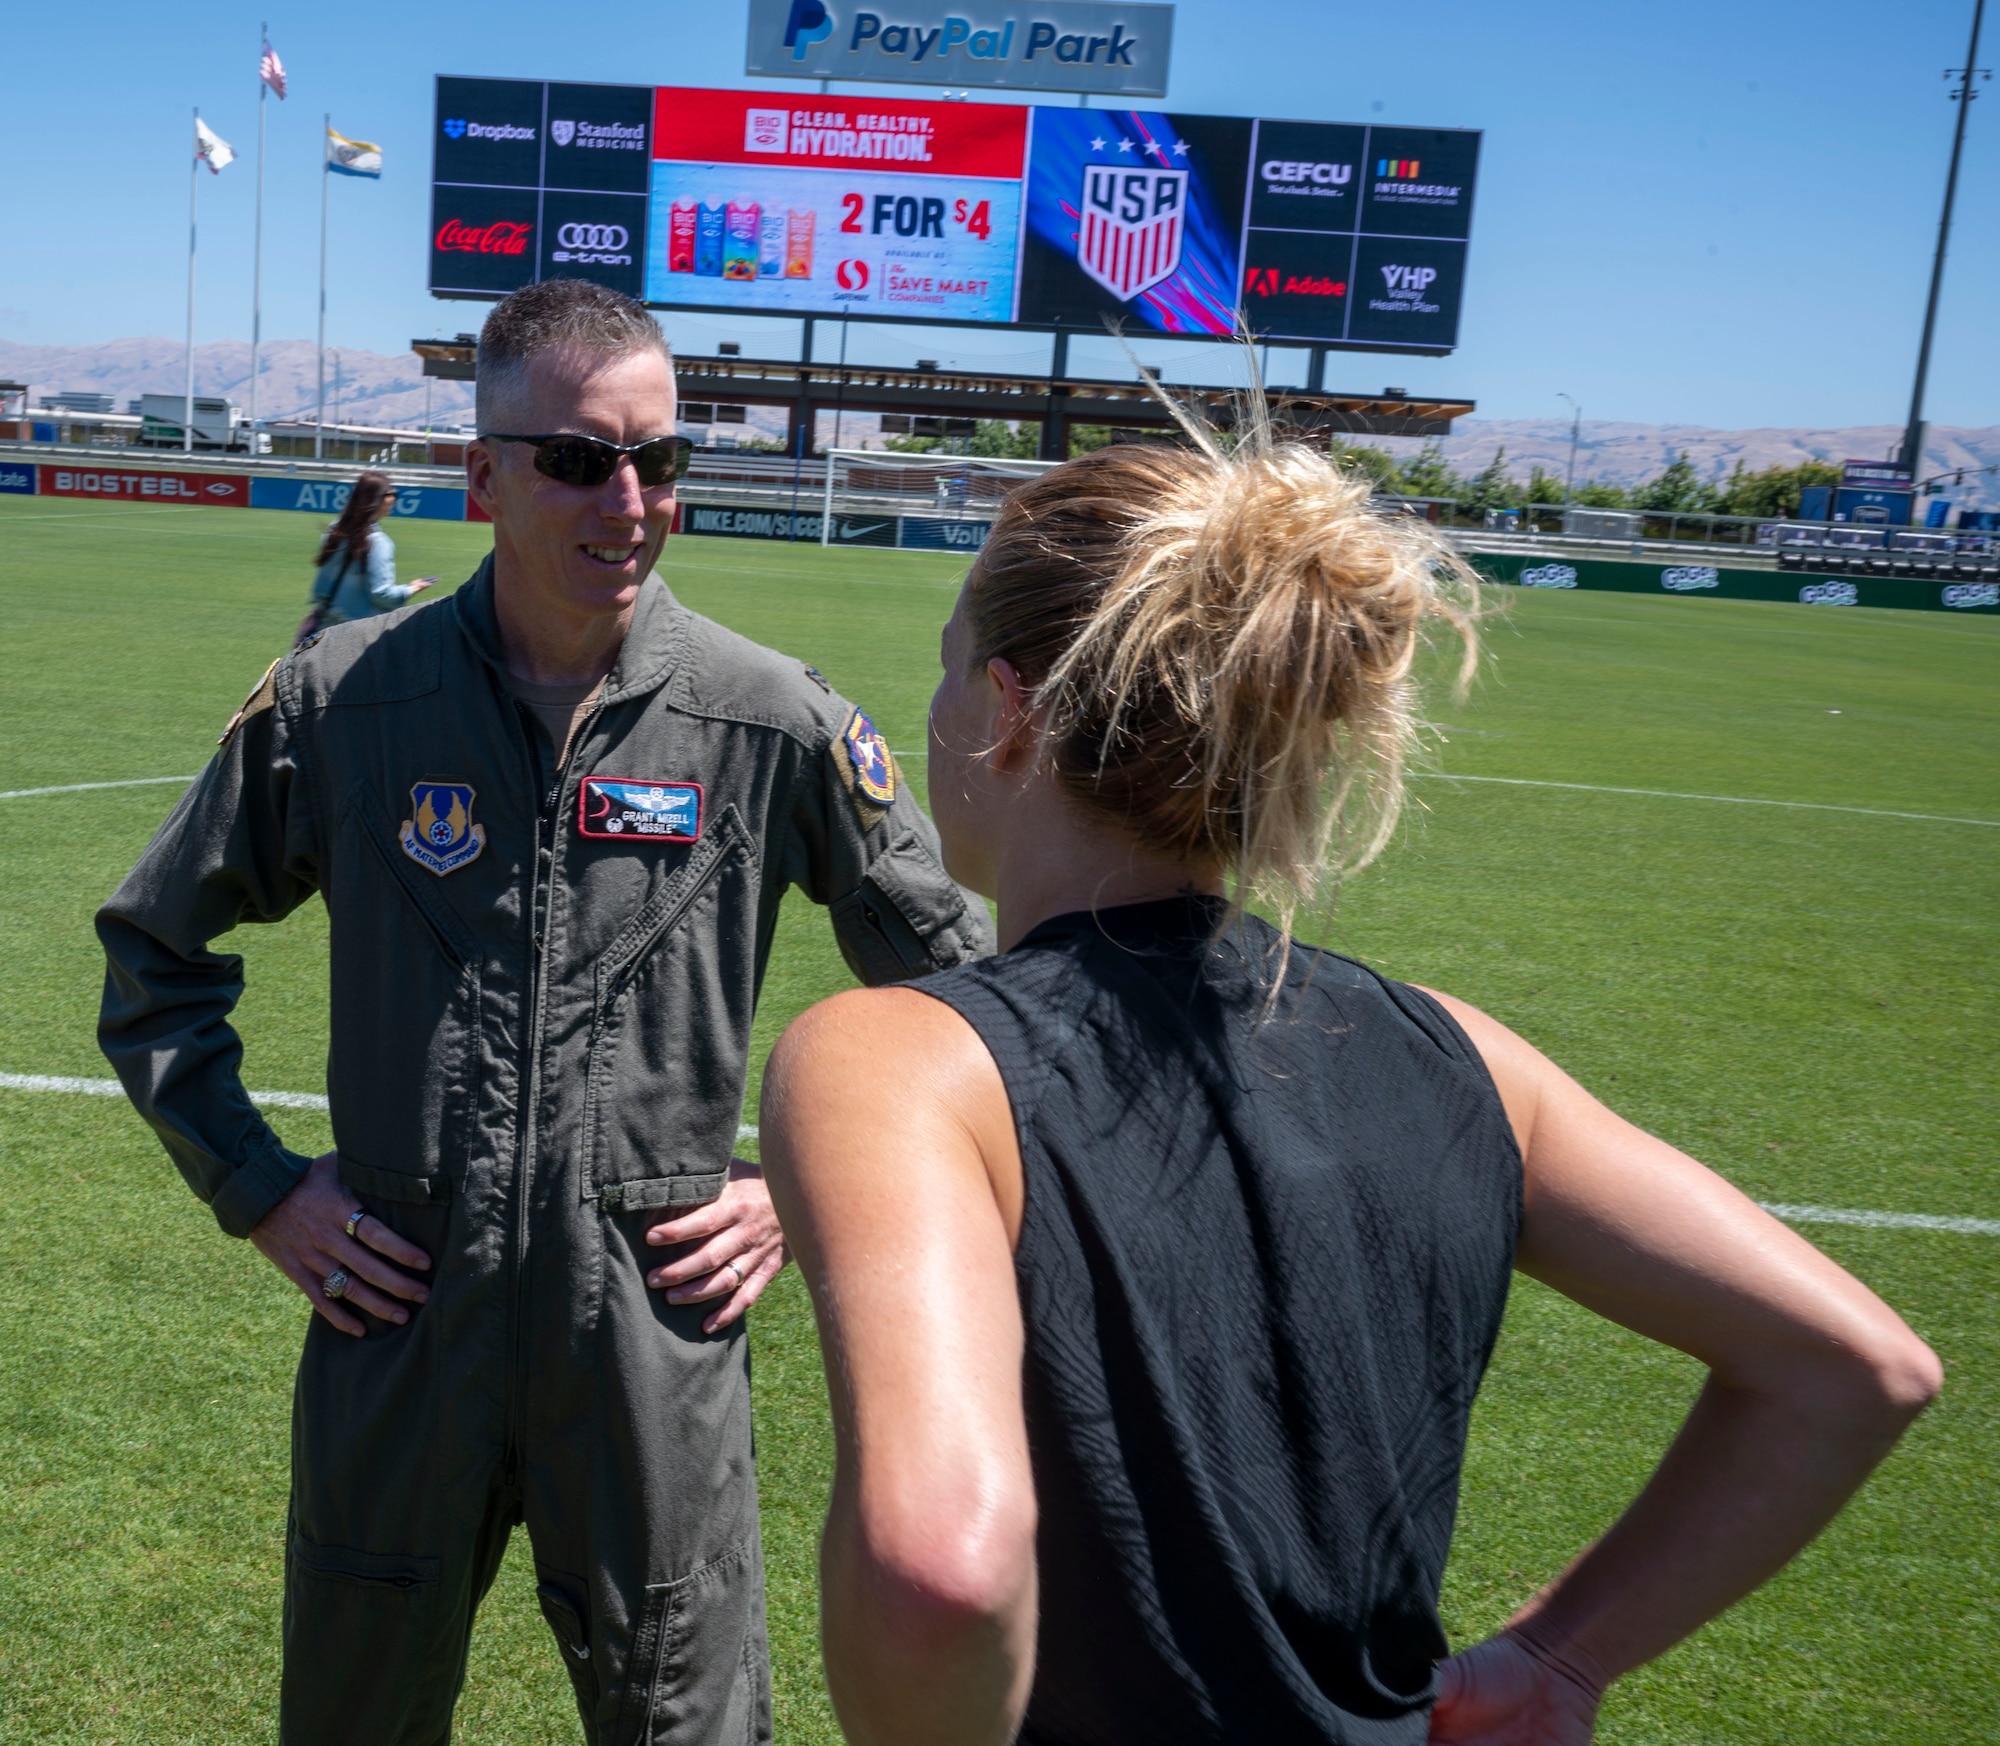 Col. Grant Mizell, Commander, 412th Operations Group chats with an U.S. Women's National Team player. Team Edwards sent an all female crew from the 412th Operations Group to conduct a special flyover for the National Women's Soccer League at PayPal Park, July 9 in San Jose, California.